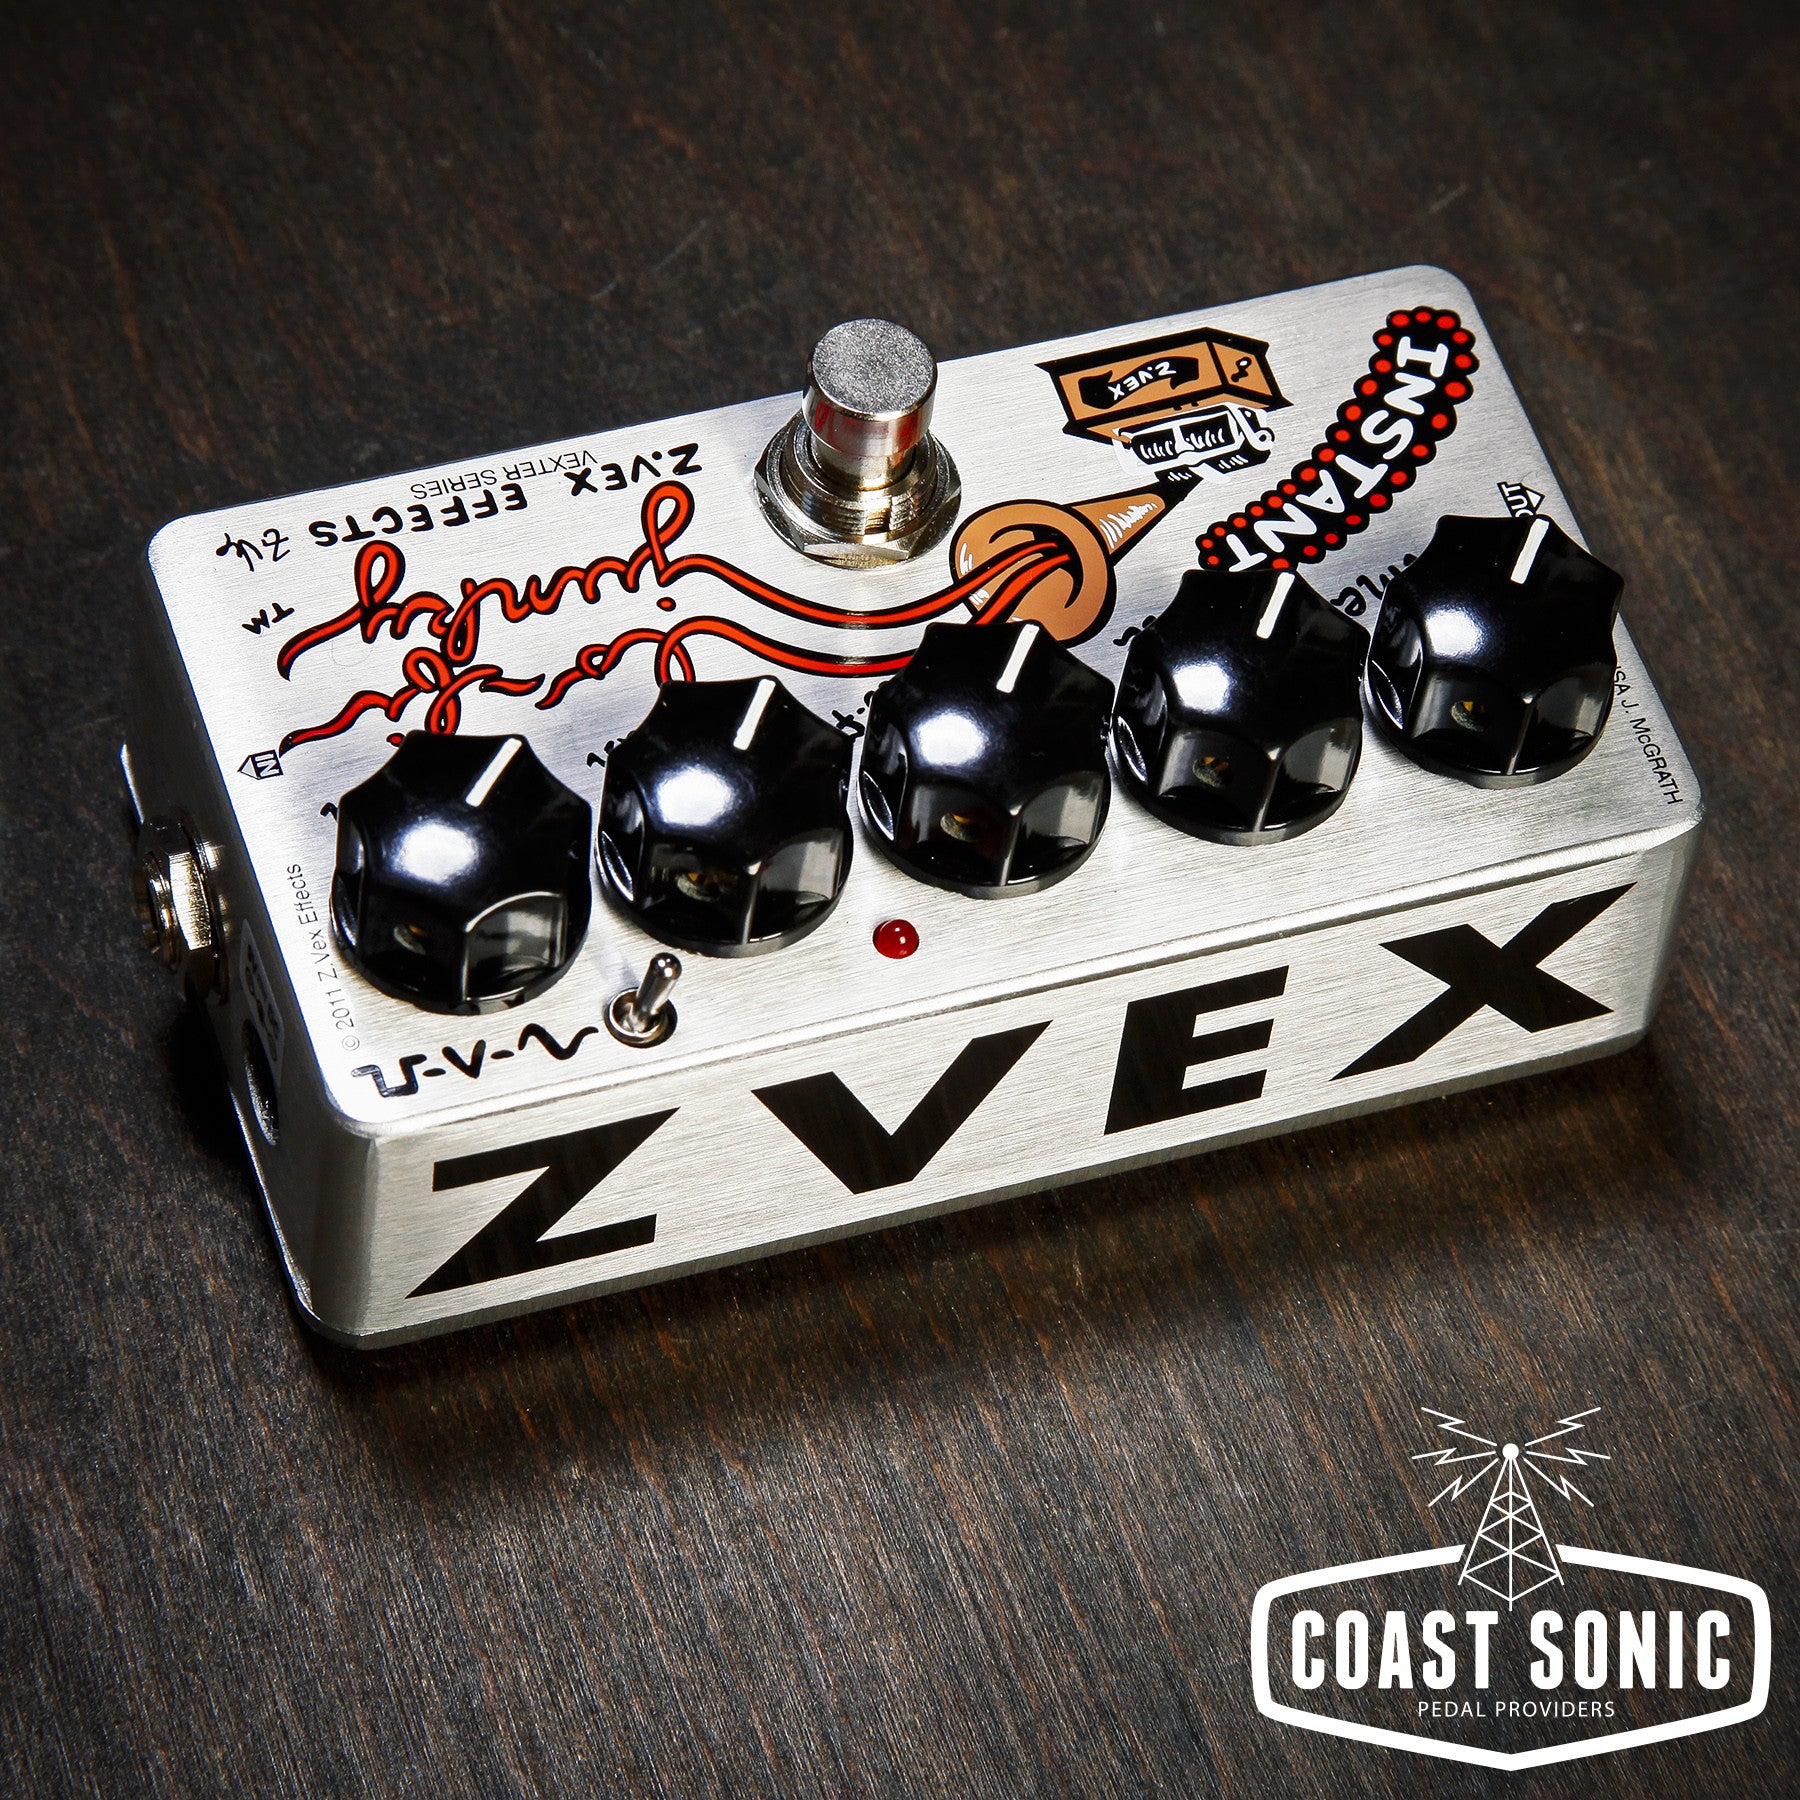 Zvex Effects Instant Lo-Fi Junky Vexter Series